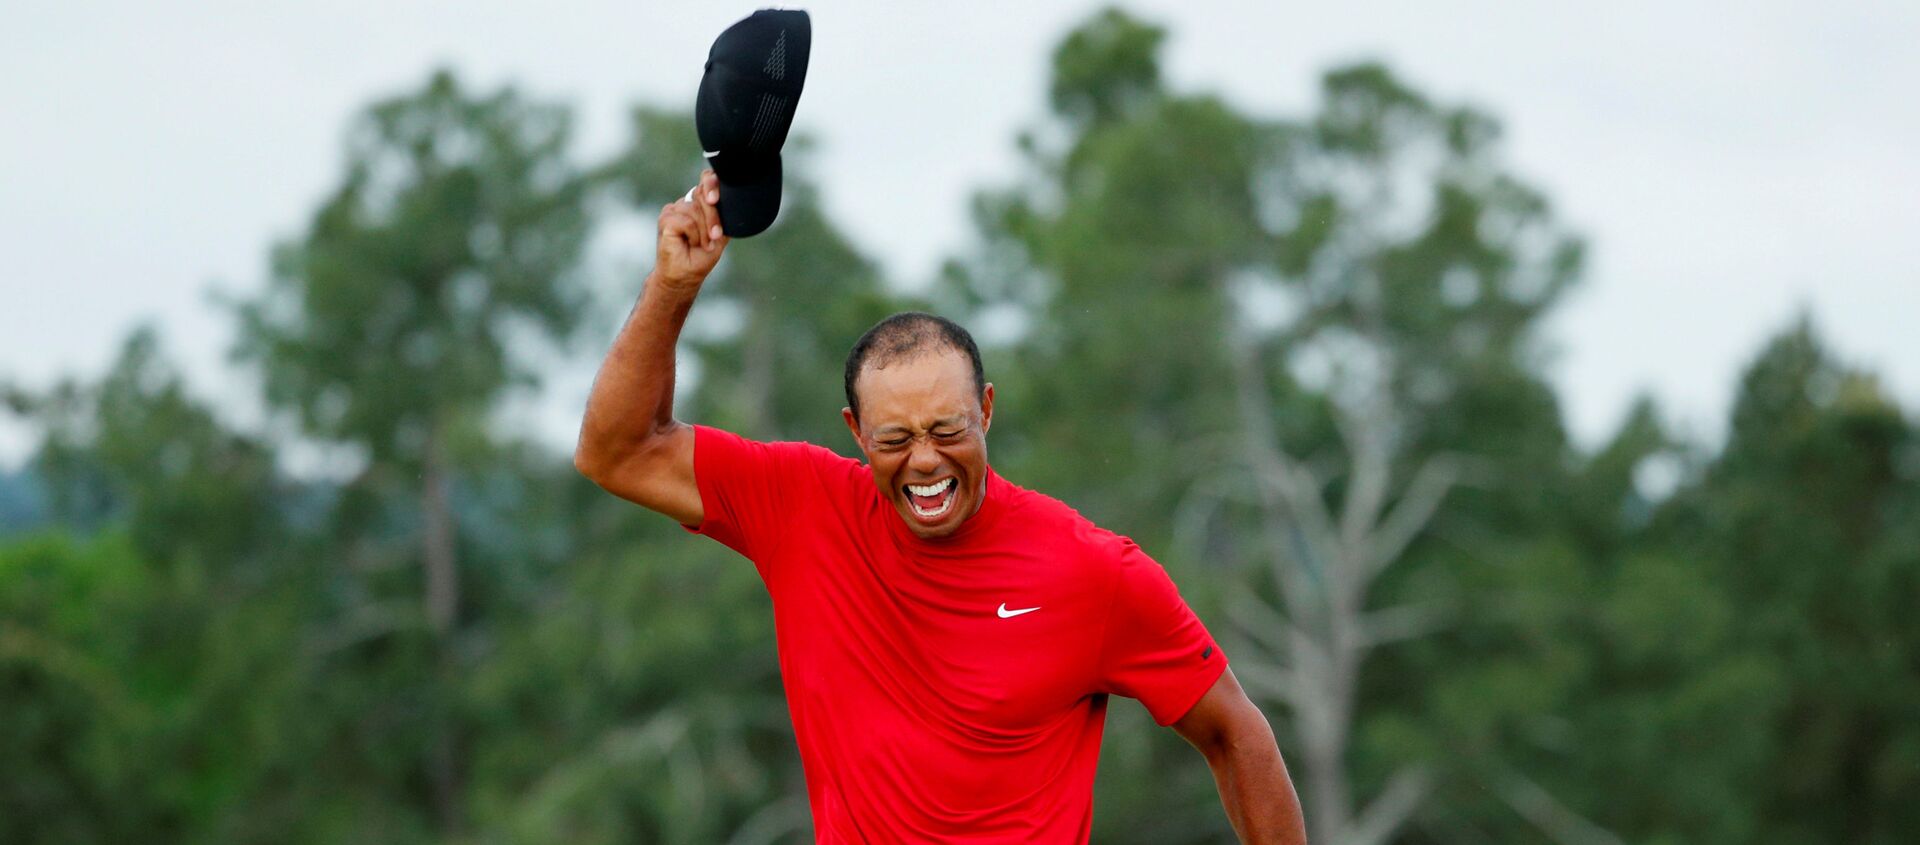 Golf - Masters - Augusta National Golf Club - Augusta, Georgia, 14 April 2019 - Tiger Woods of the U.S. celebrates on the 18th hole after winning the 2019 Masters - Sputnik International, 1920, 20.03.2021